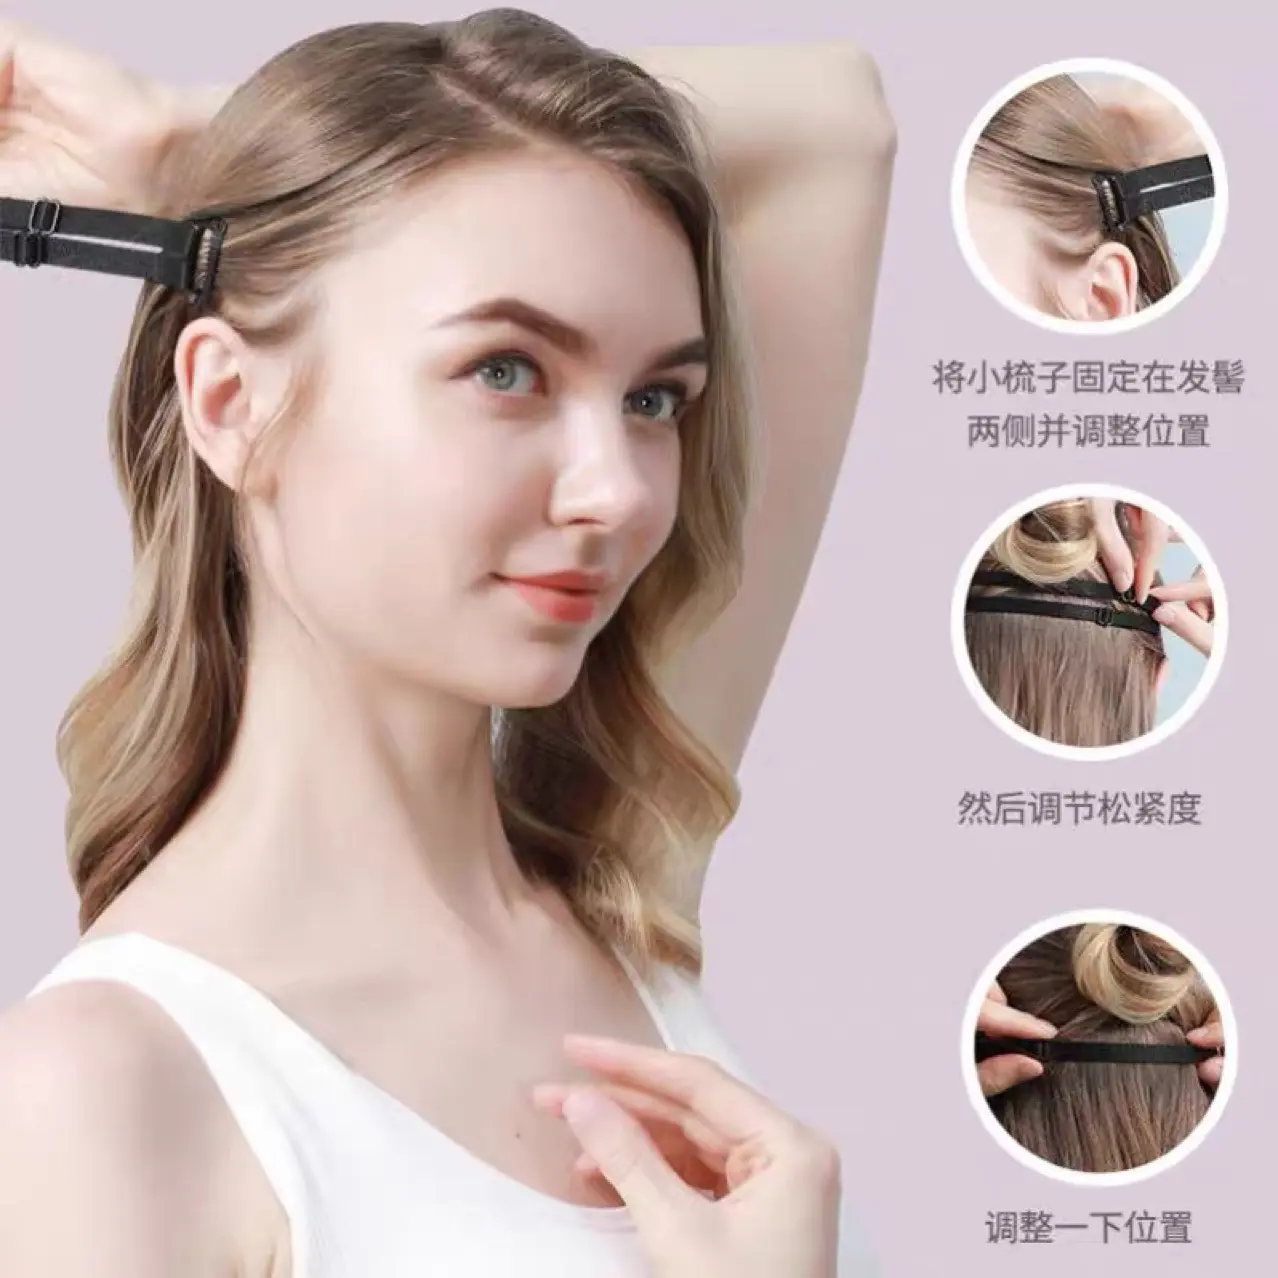 OEM Instant Face Lifting Adjustable The Stretching Straps For Lift The Eyes/Eyebrows Clip Elastic Band Anti-Wrinkle Face Tapes